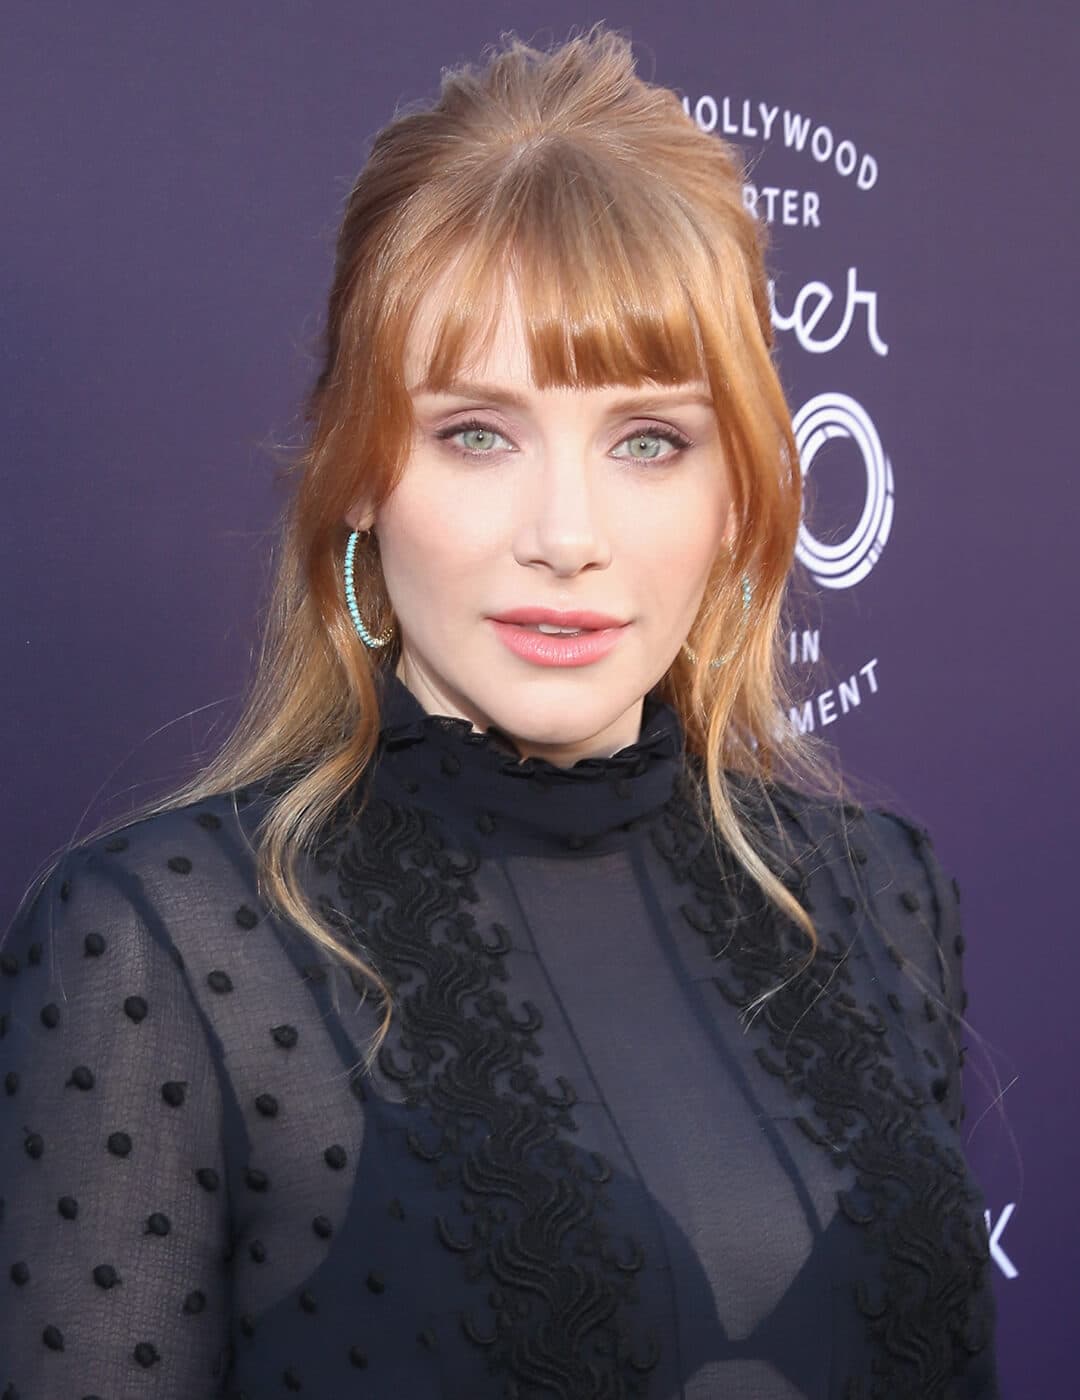 A photo of Bryce Dallas Howard with golden blonde hair and a light copper shade, wearing 